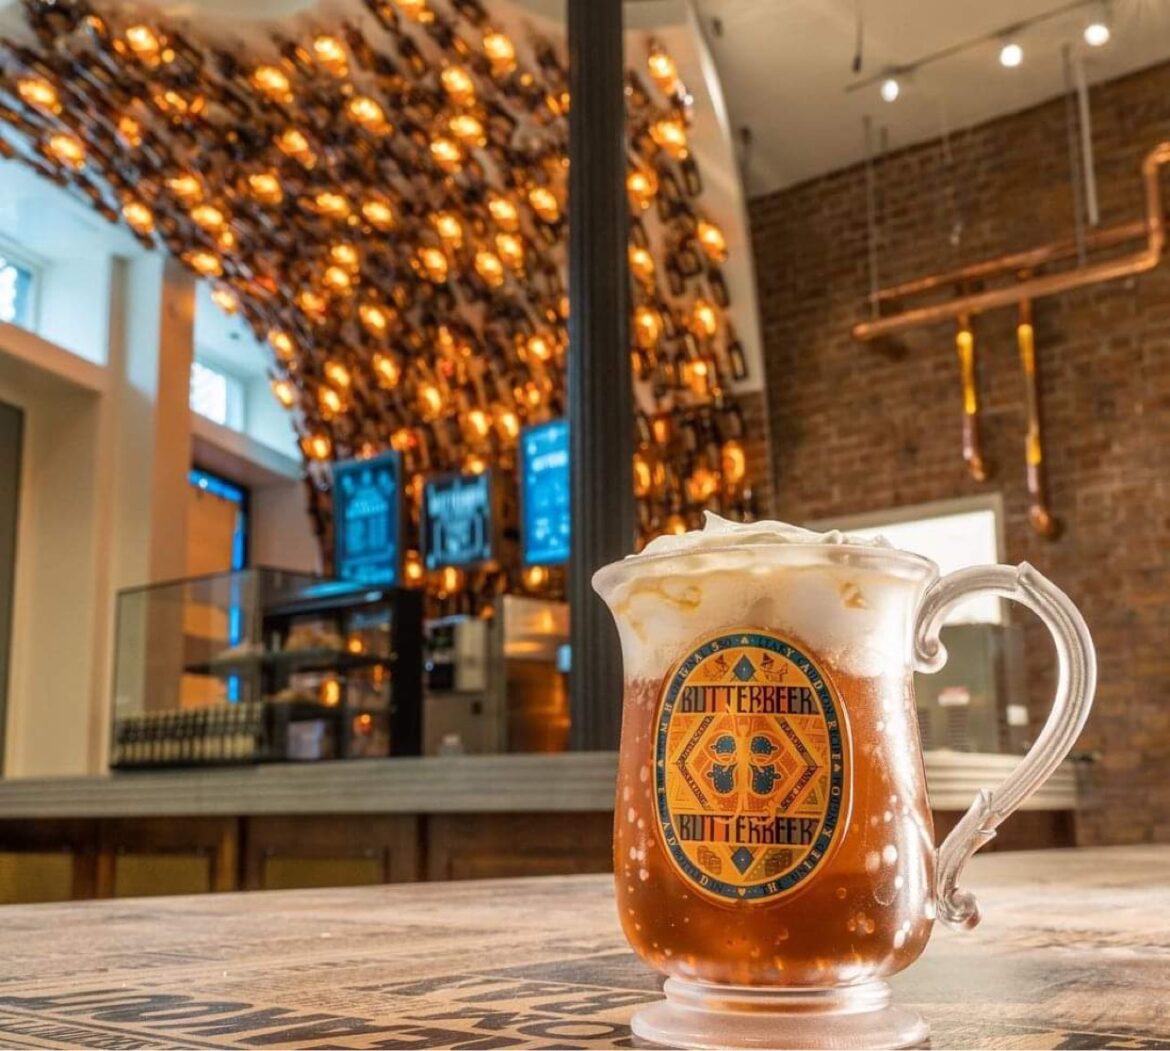 Harry Potter NY will be home to New York’s only Butterbeer Bar